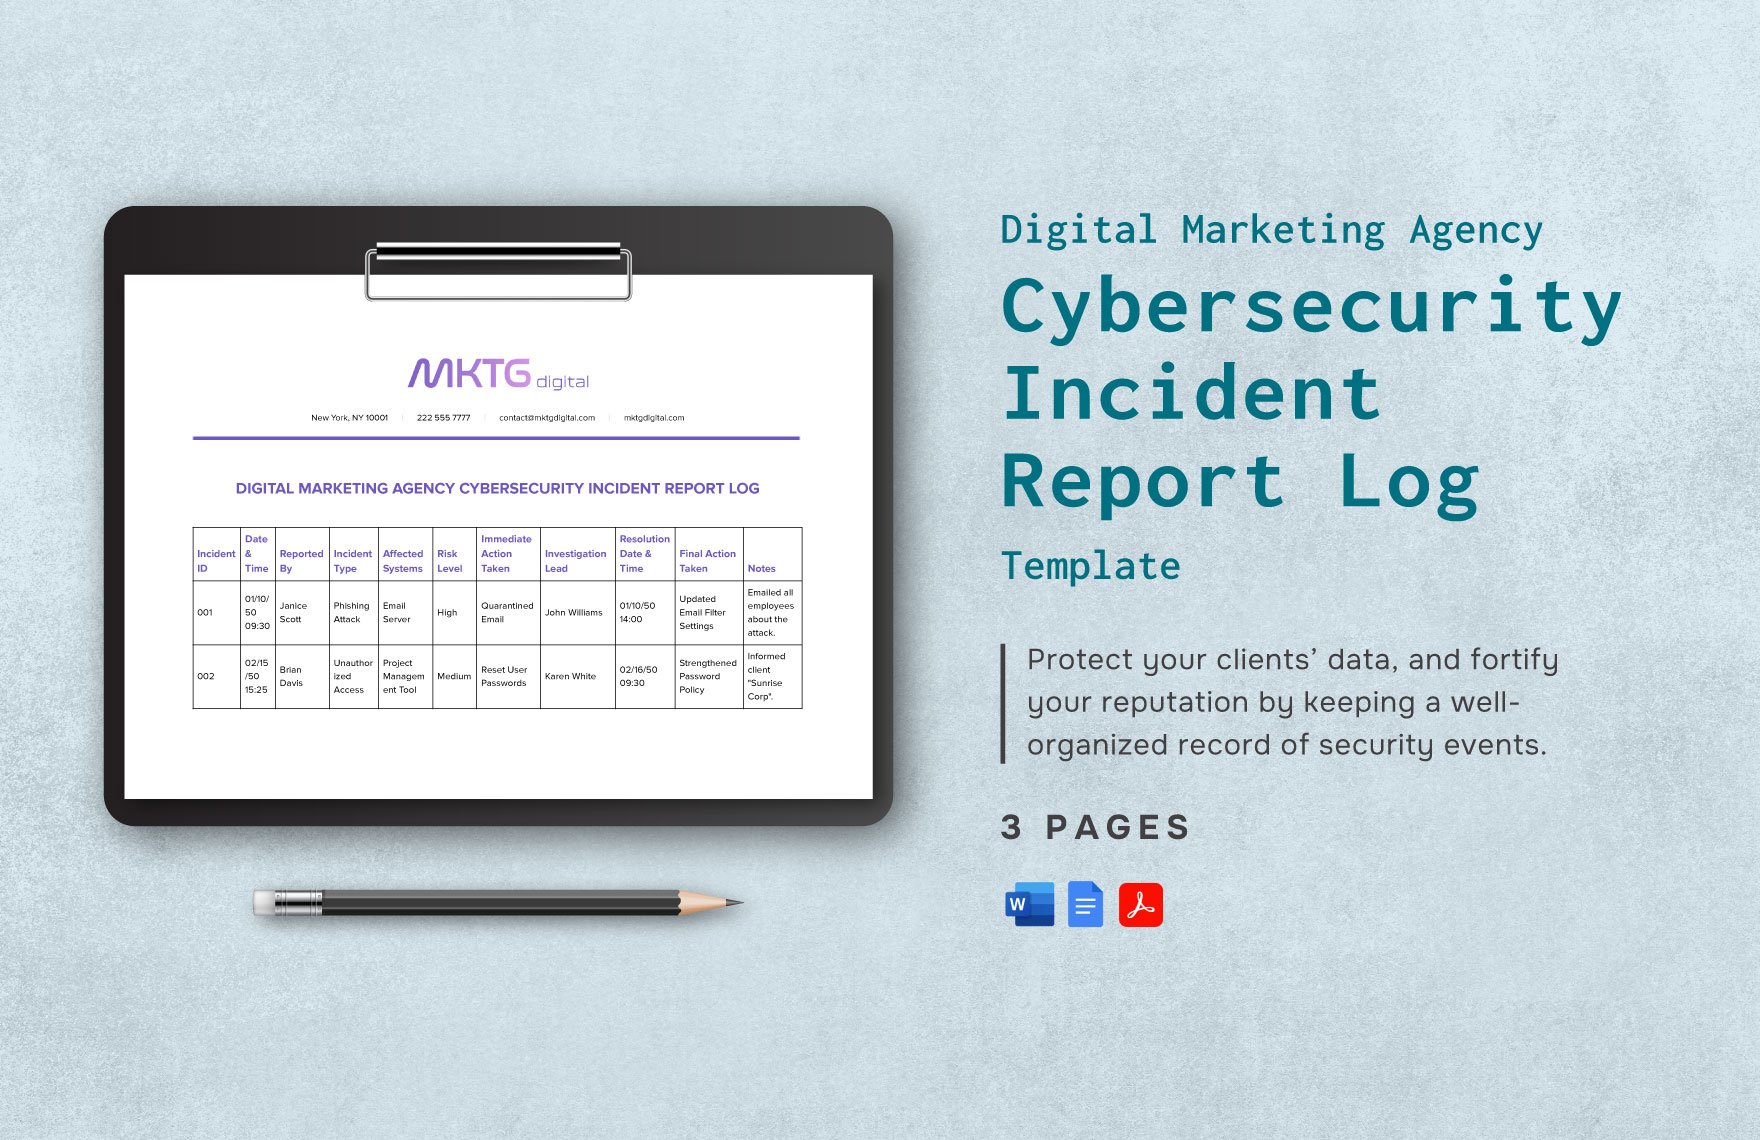 Digital Marketing Agency Cybersecurity Incident Report Log Template in Word, Google Docs, PDF